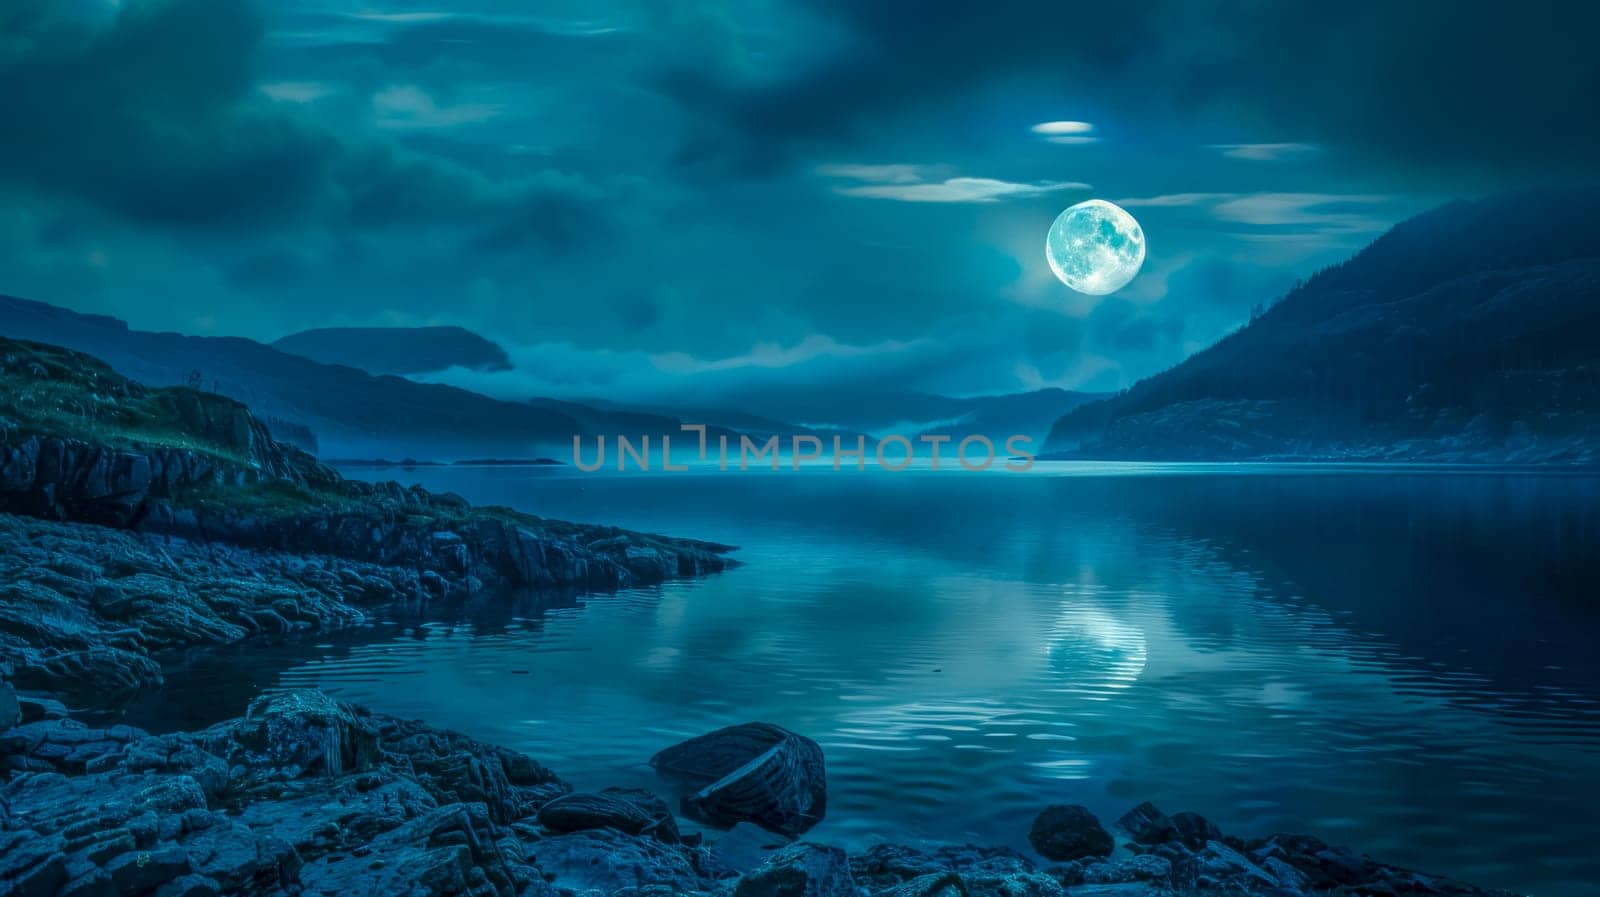 Tranquil and serene moonlit seascape with majestic natural beauty, featuring a full moon reflecting in the calm water, misty coastline, and atmospheric blue night sky